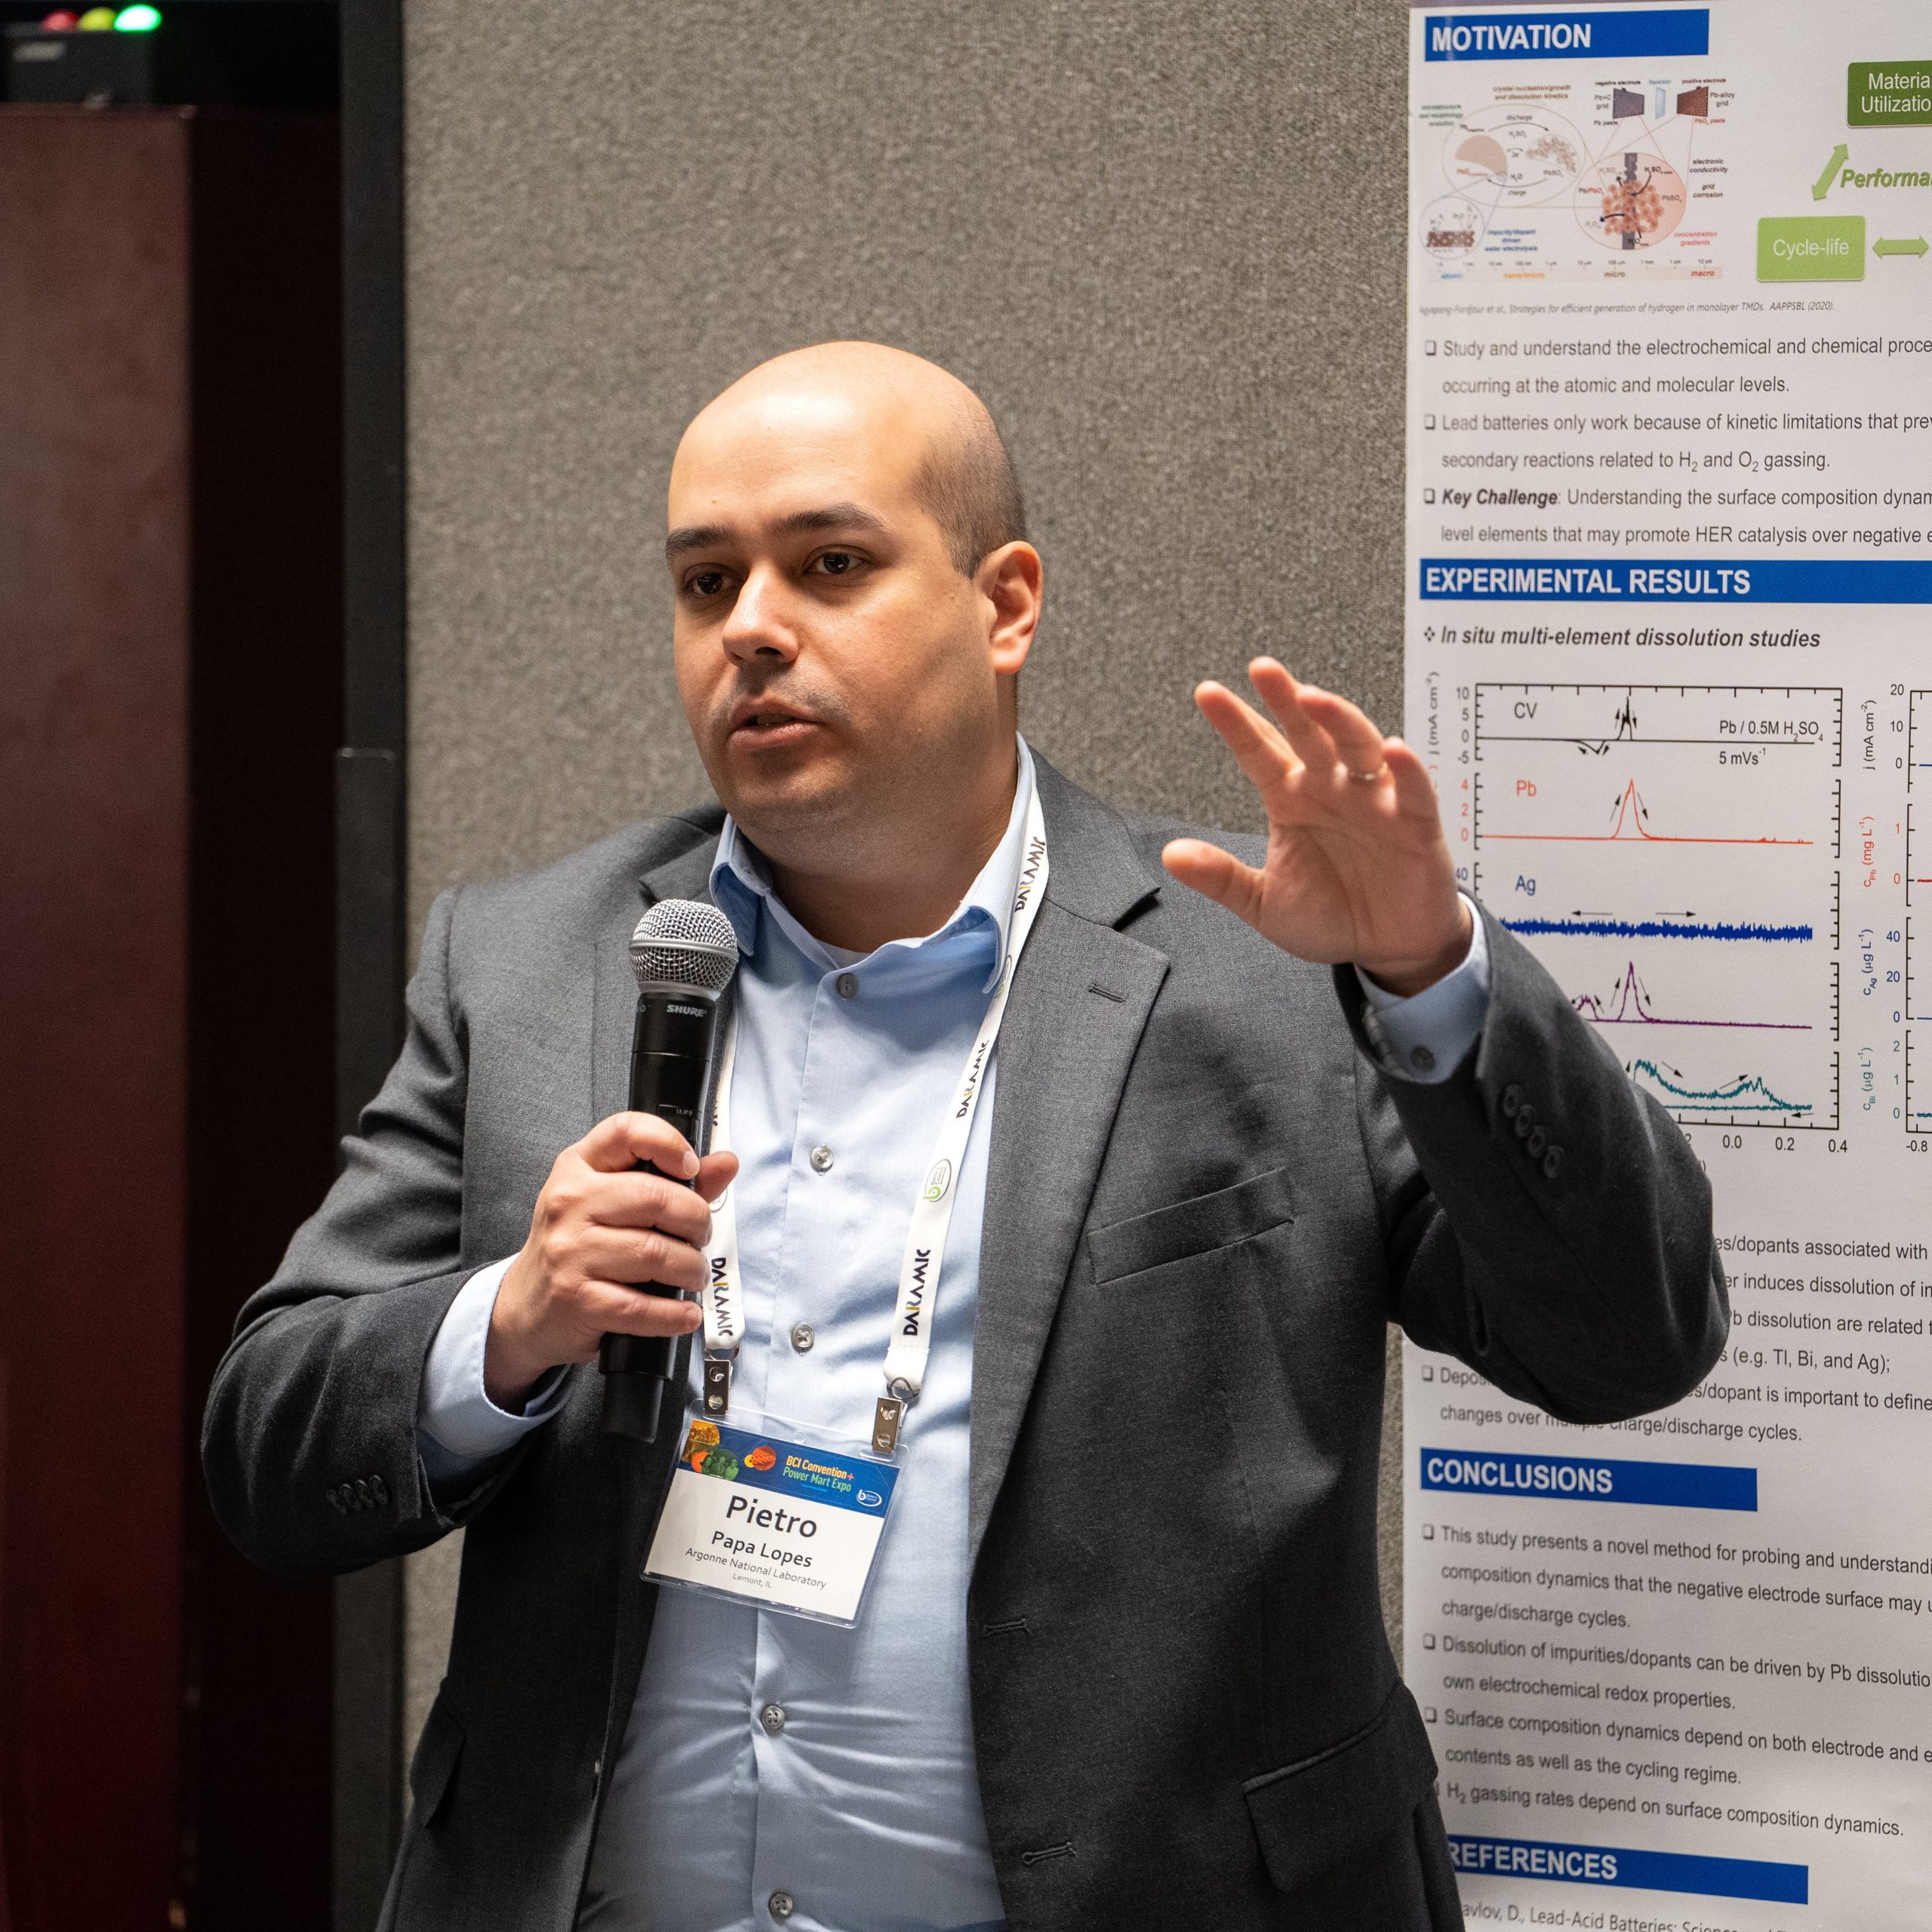 Pietro Papa Lopes presenting his battery research poster